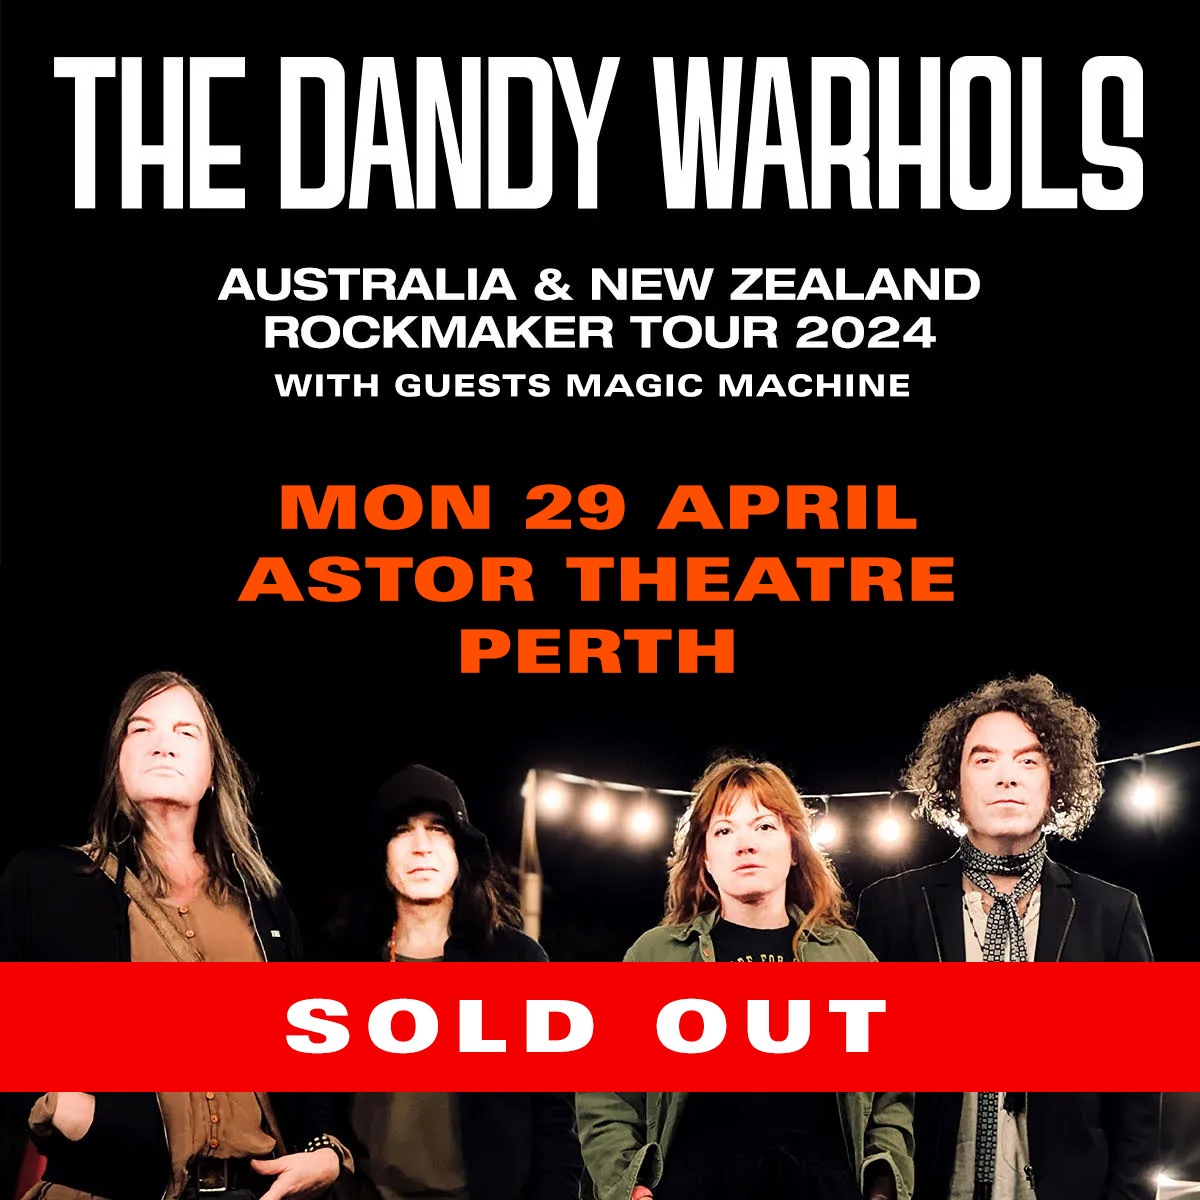 🇦🇺The Dandy Warhols LIVE Tomorrow 29/4 at @astortheatre Perth - SOLD OUT